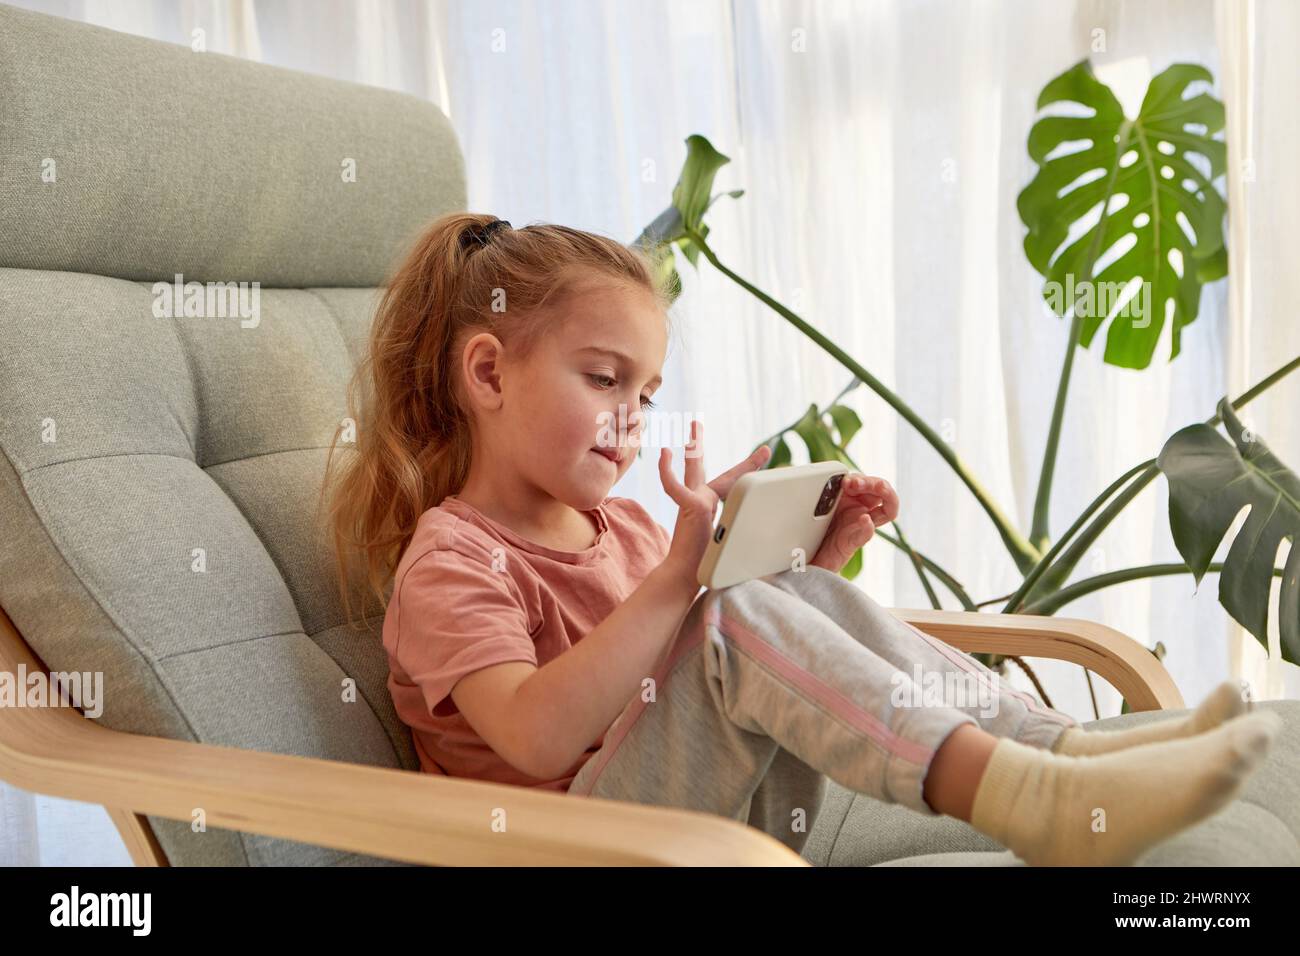 Side view of cute little girl with long blond hair in casual clothes playing video game on mobile phone while sitting on comfortable armchair in dayli Stock Photo